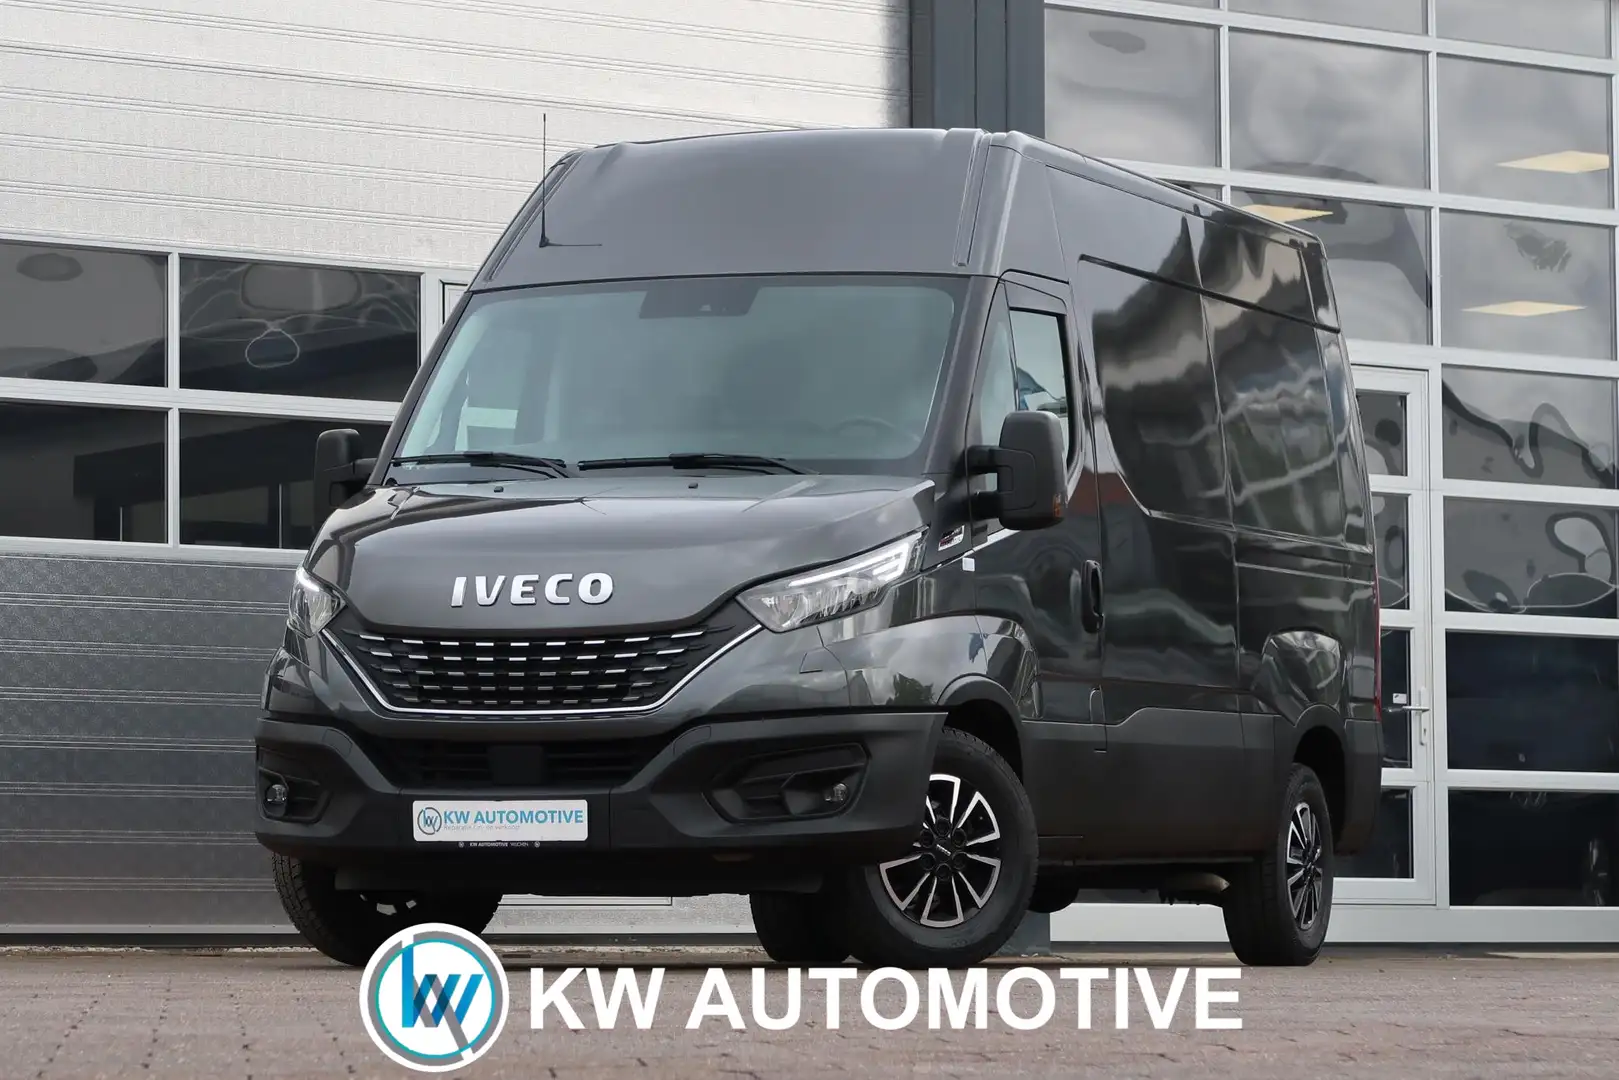 Iveco Daily 35S21V 3.0 352 AUT/ LUCHT/ CAMERA/ LED/ ACC/ NAVI/ siva - 1